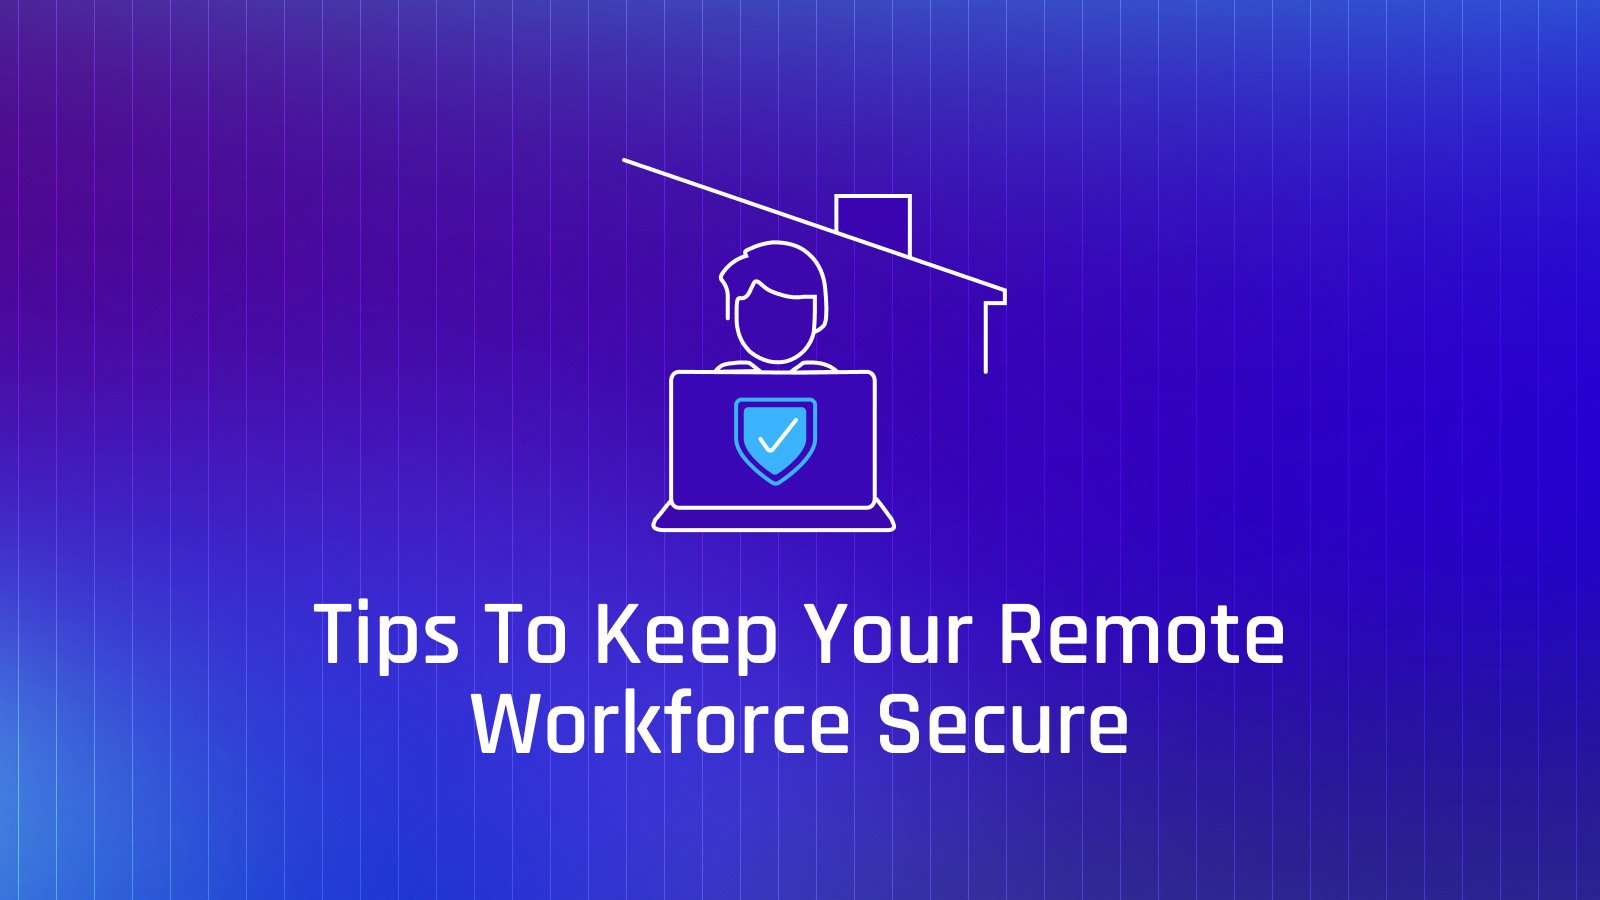 Tips-to-Keep-Your-Remote-Workforce-Secure_V1